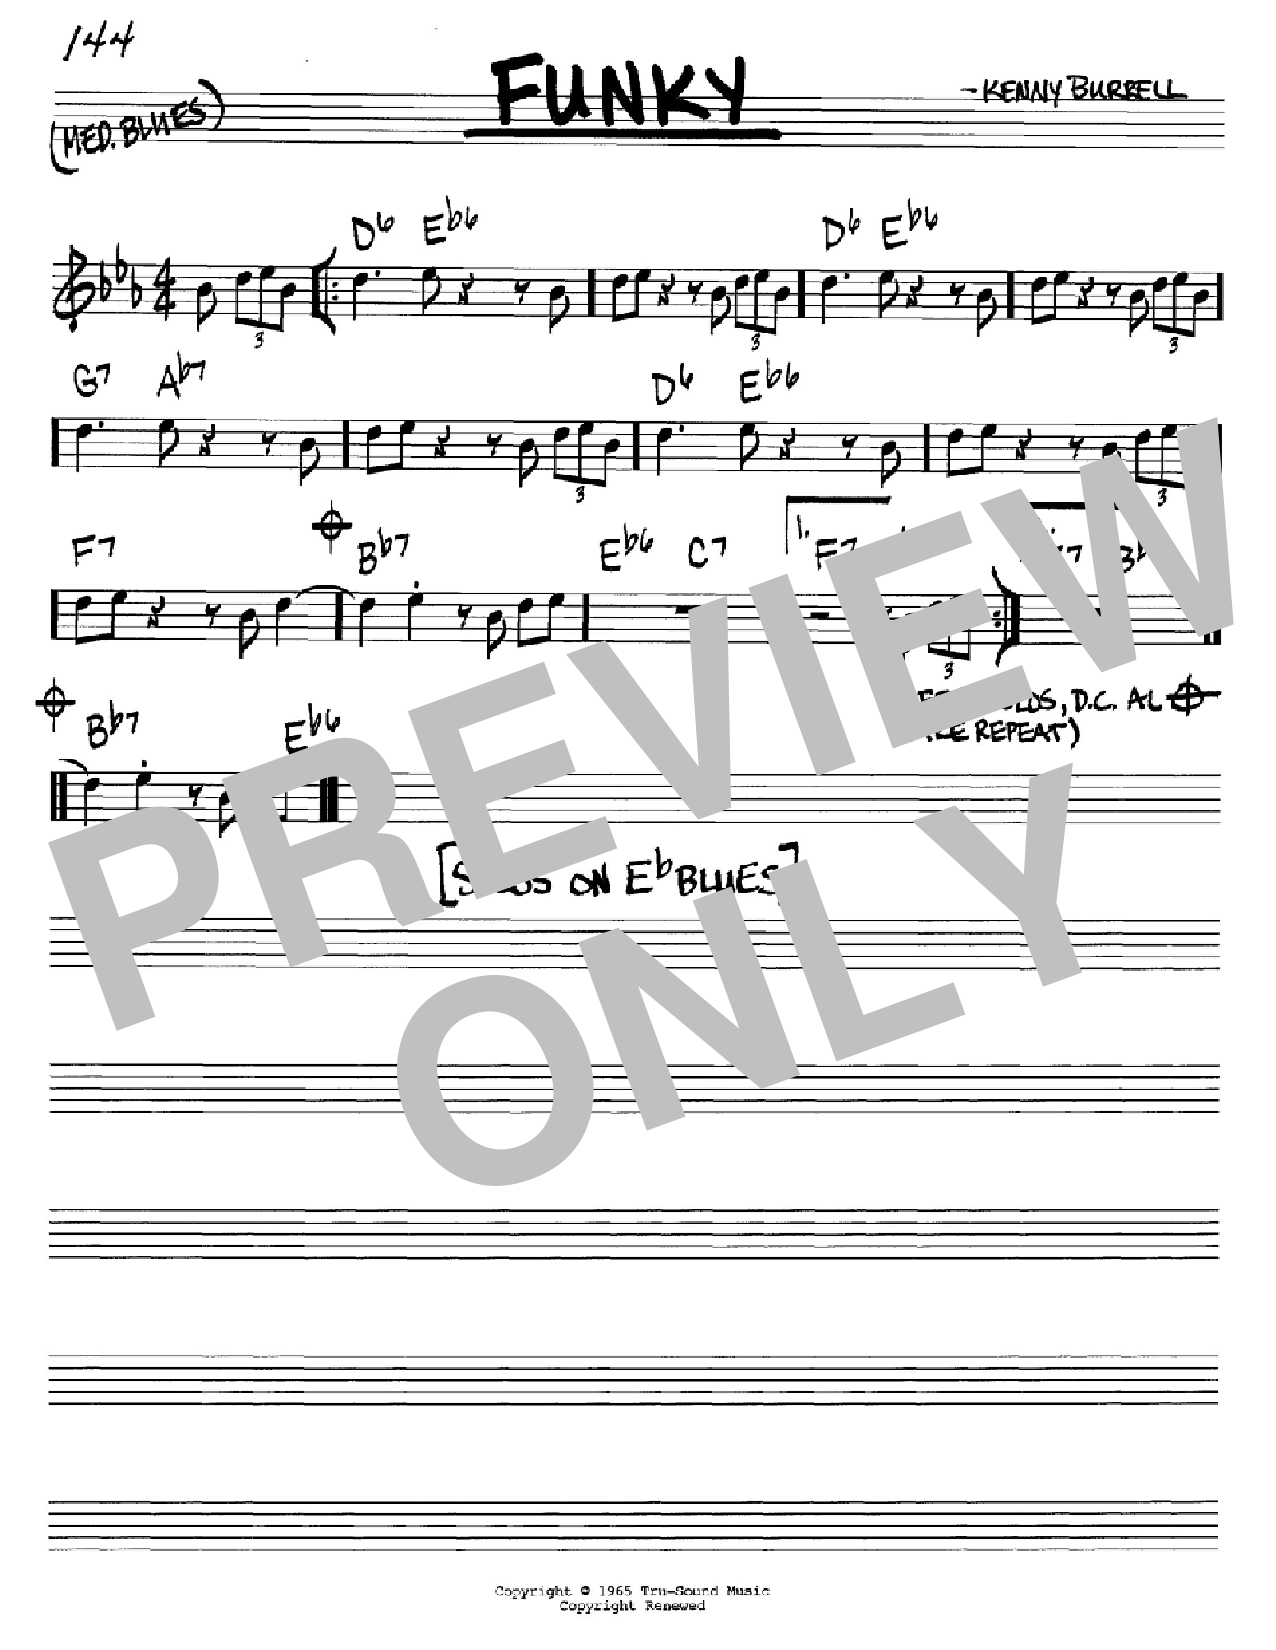 Download Kenny Burrell Funky Sheet Music